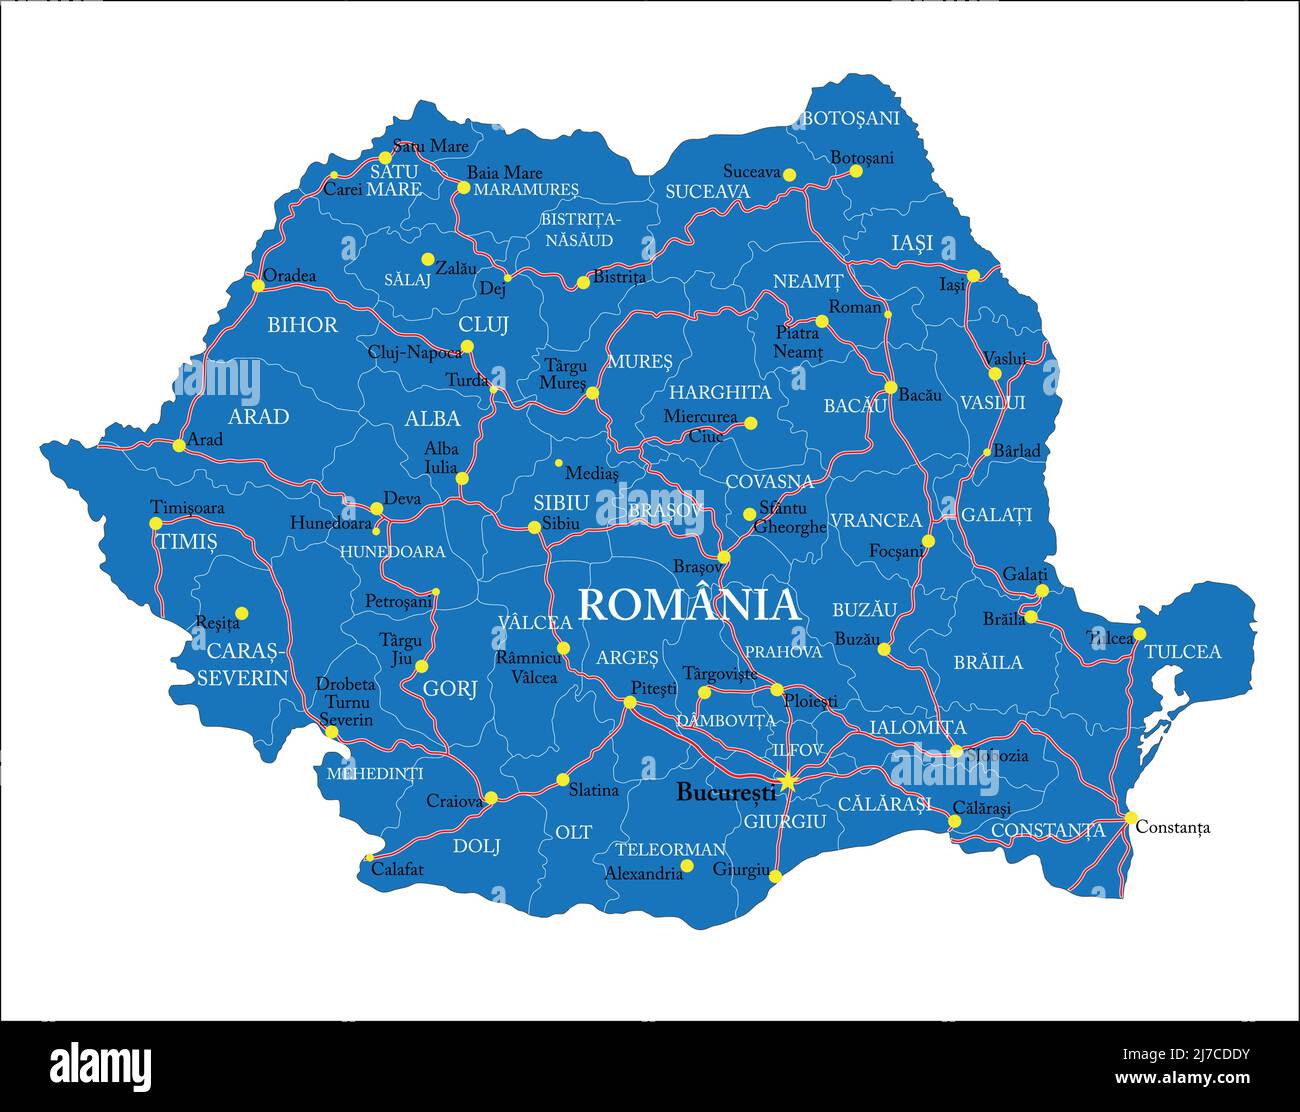 Highly detailed vector map of Romania with administrative regions, main cities and roads. Stock Vector